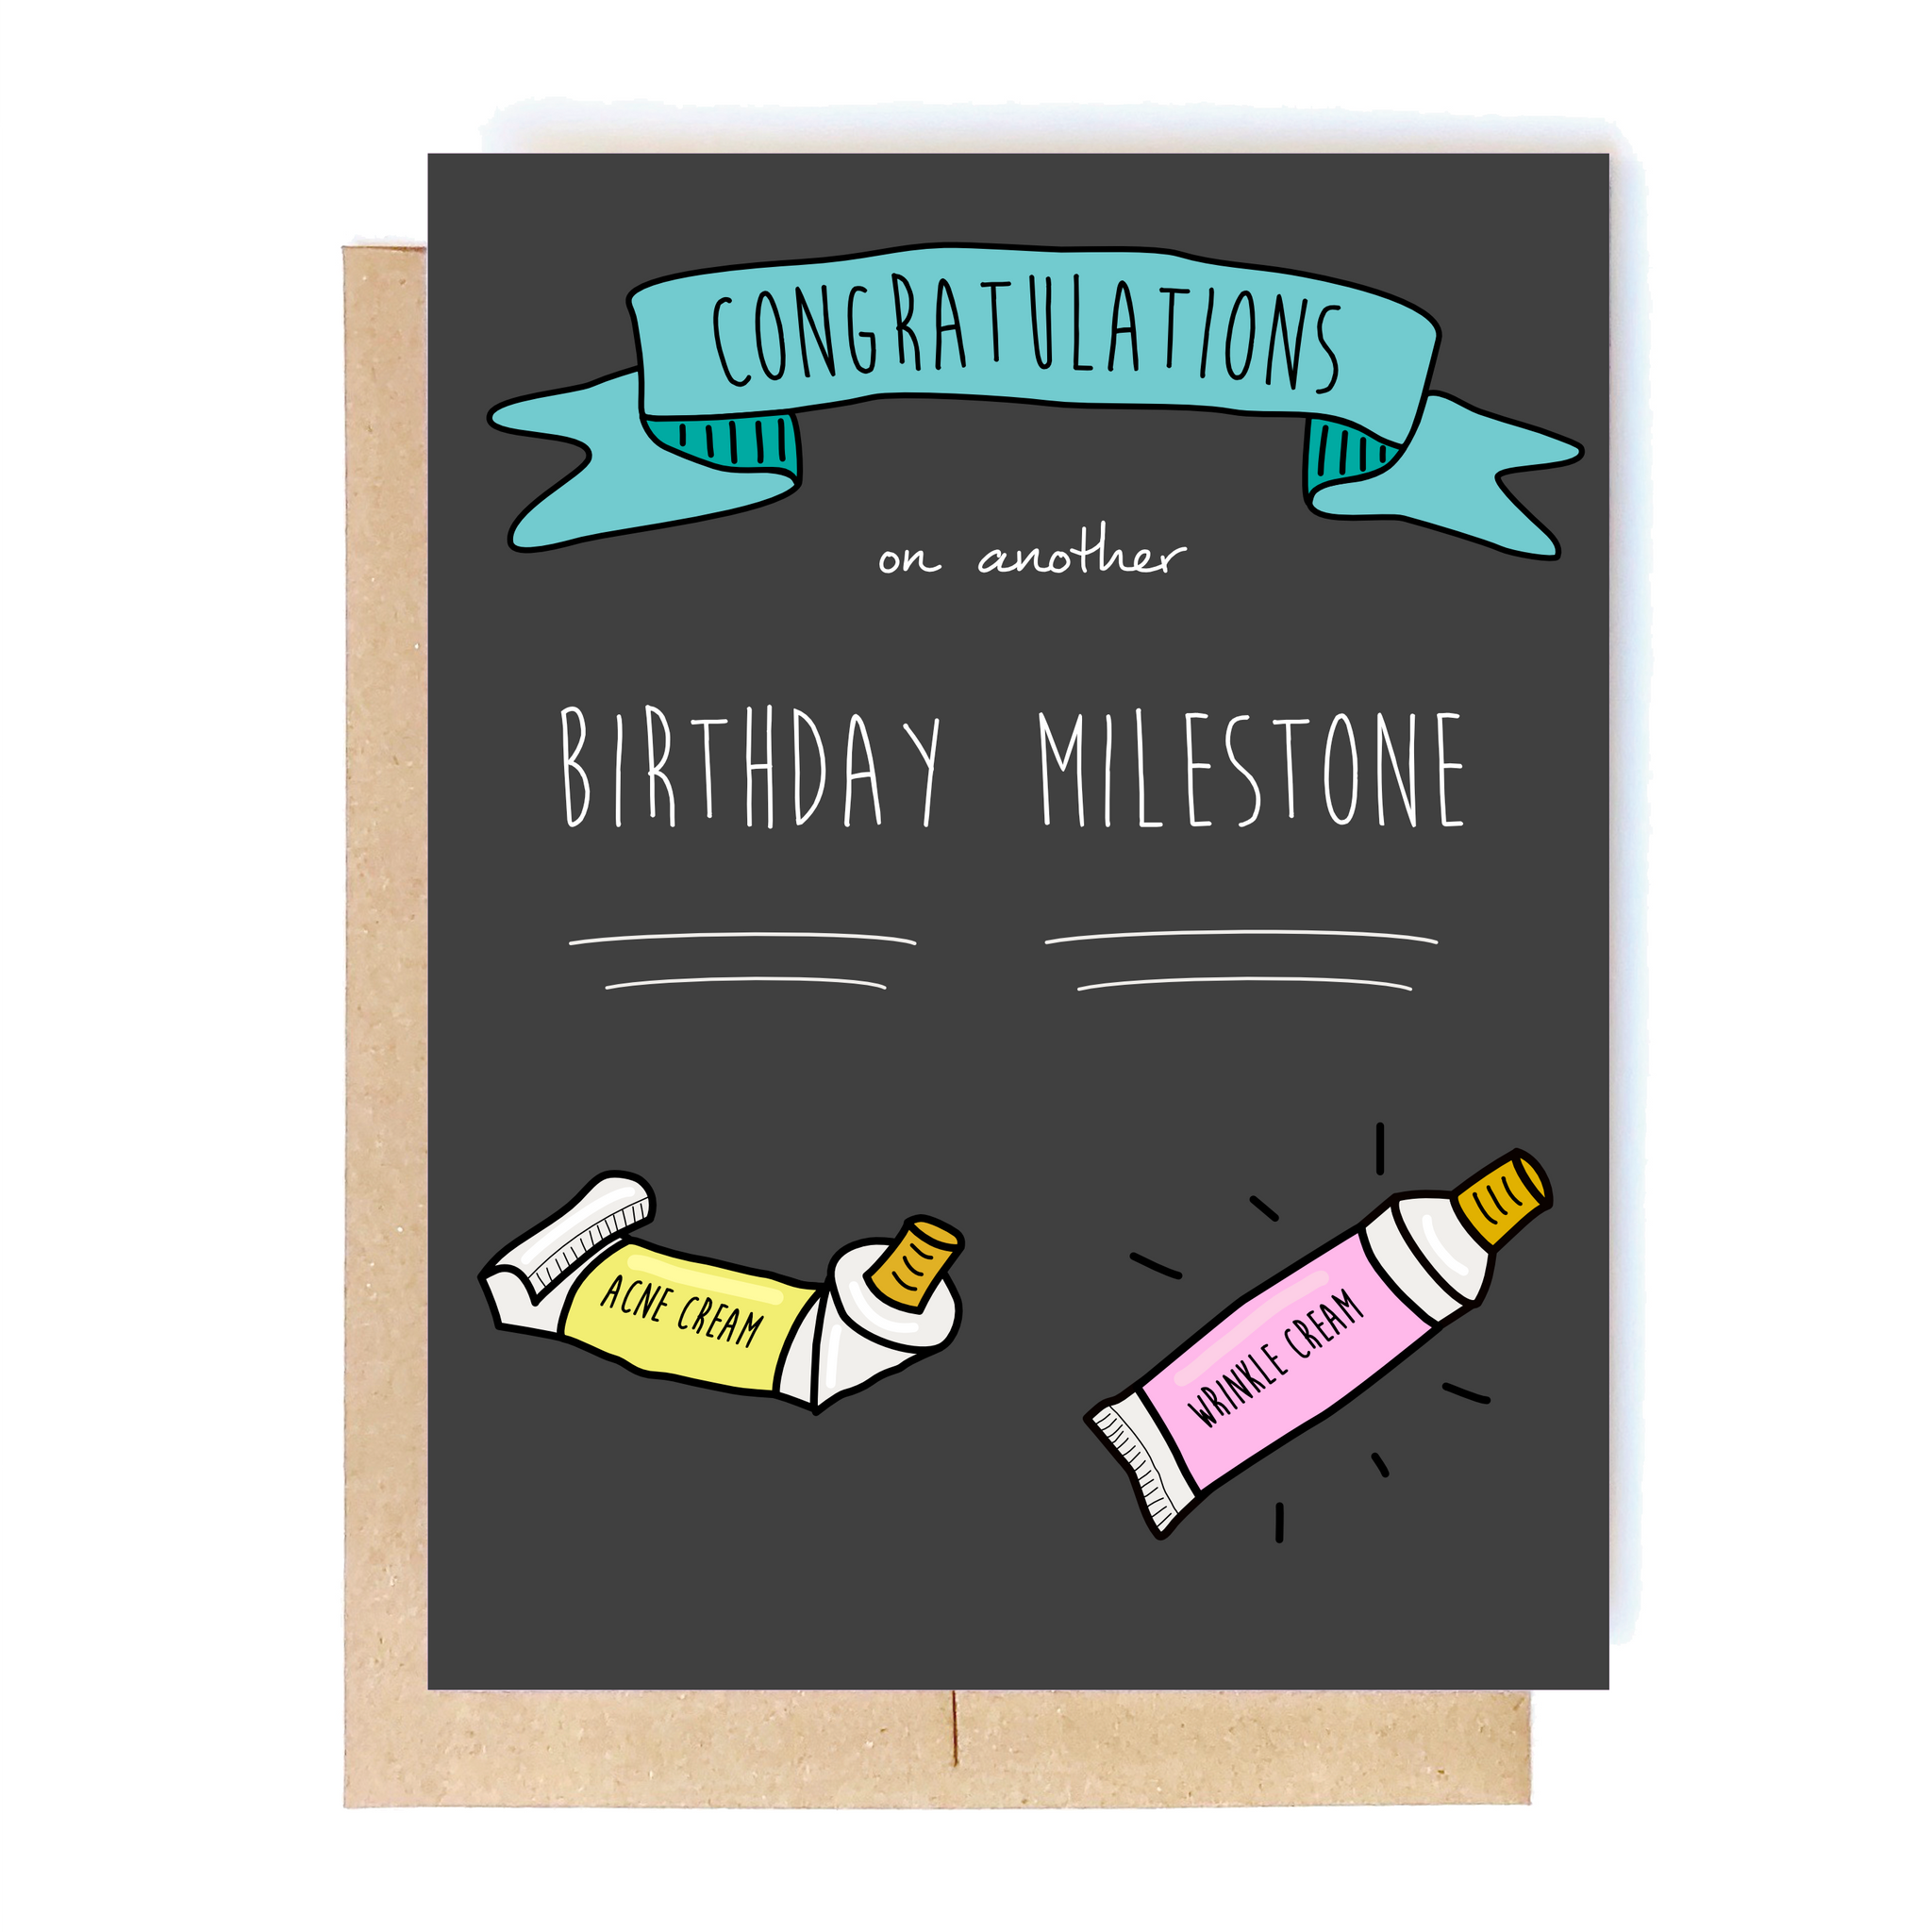 Card Front: Congratulations on another birthday milestone.